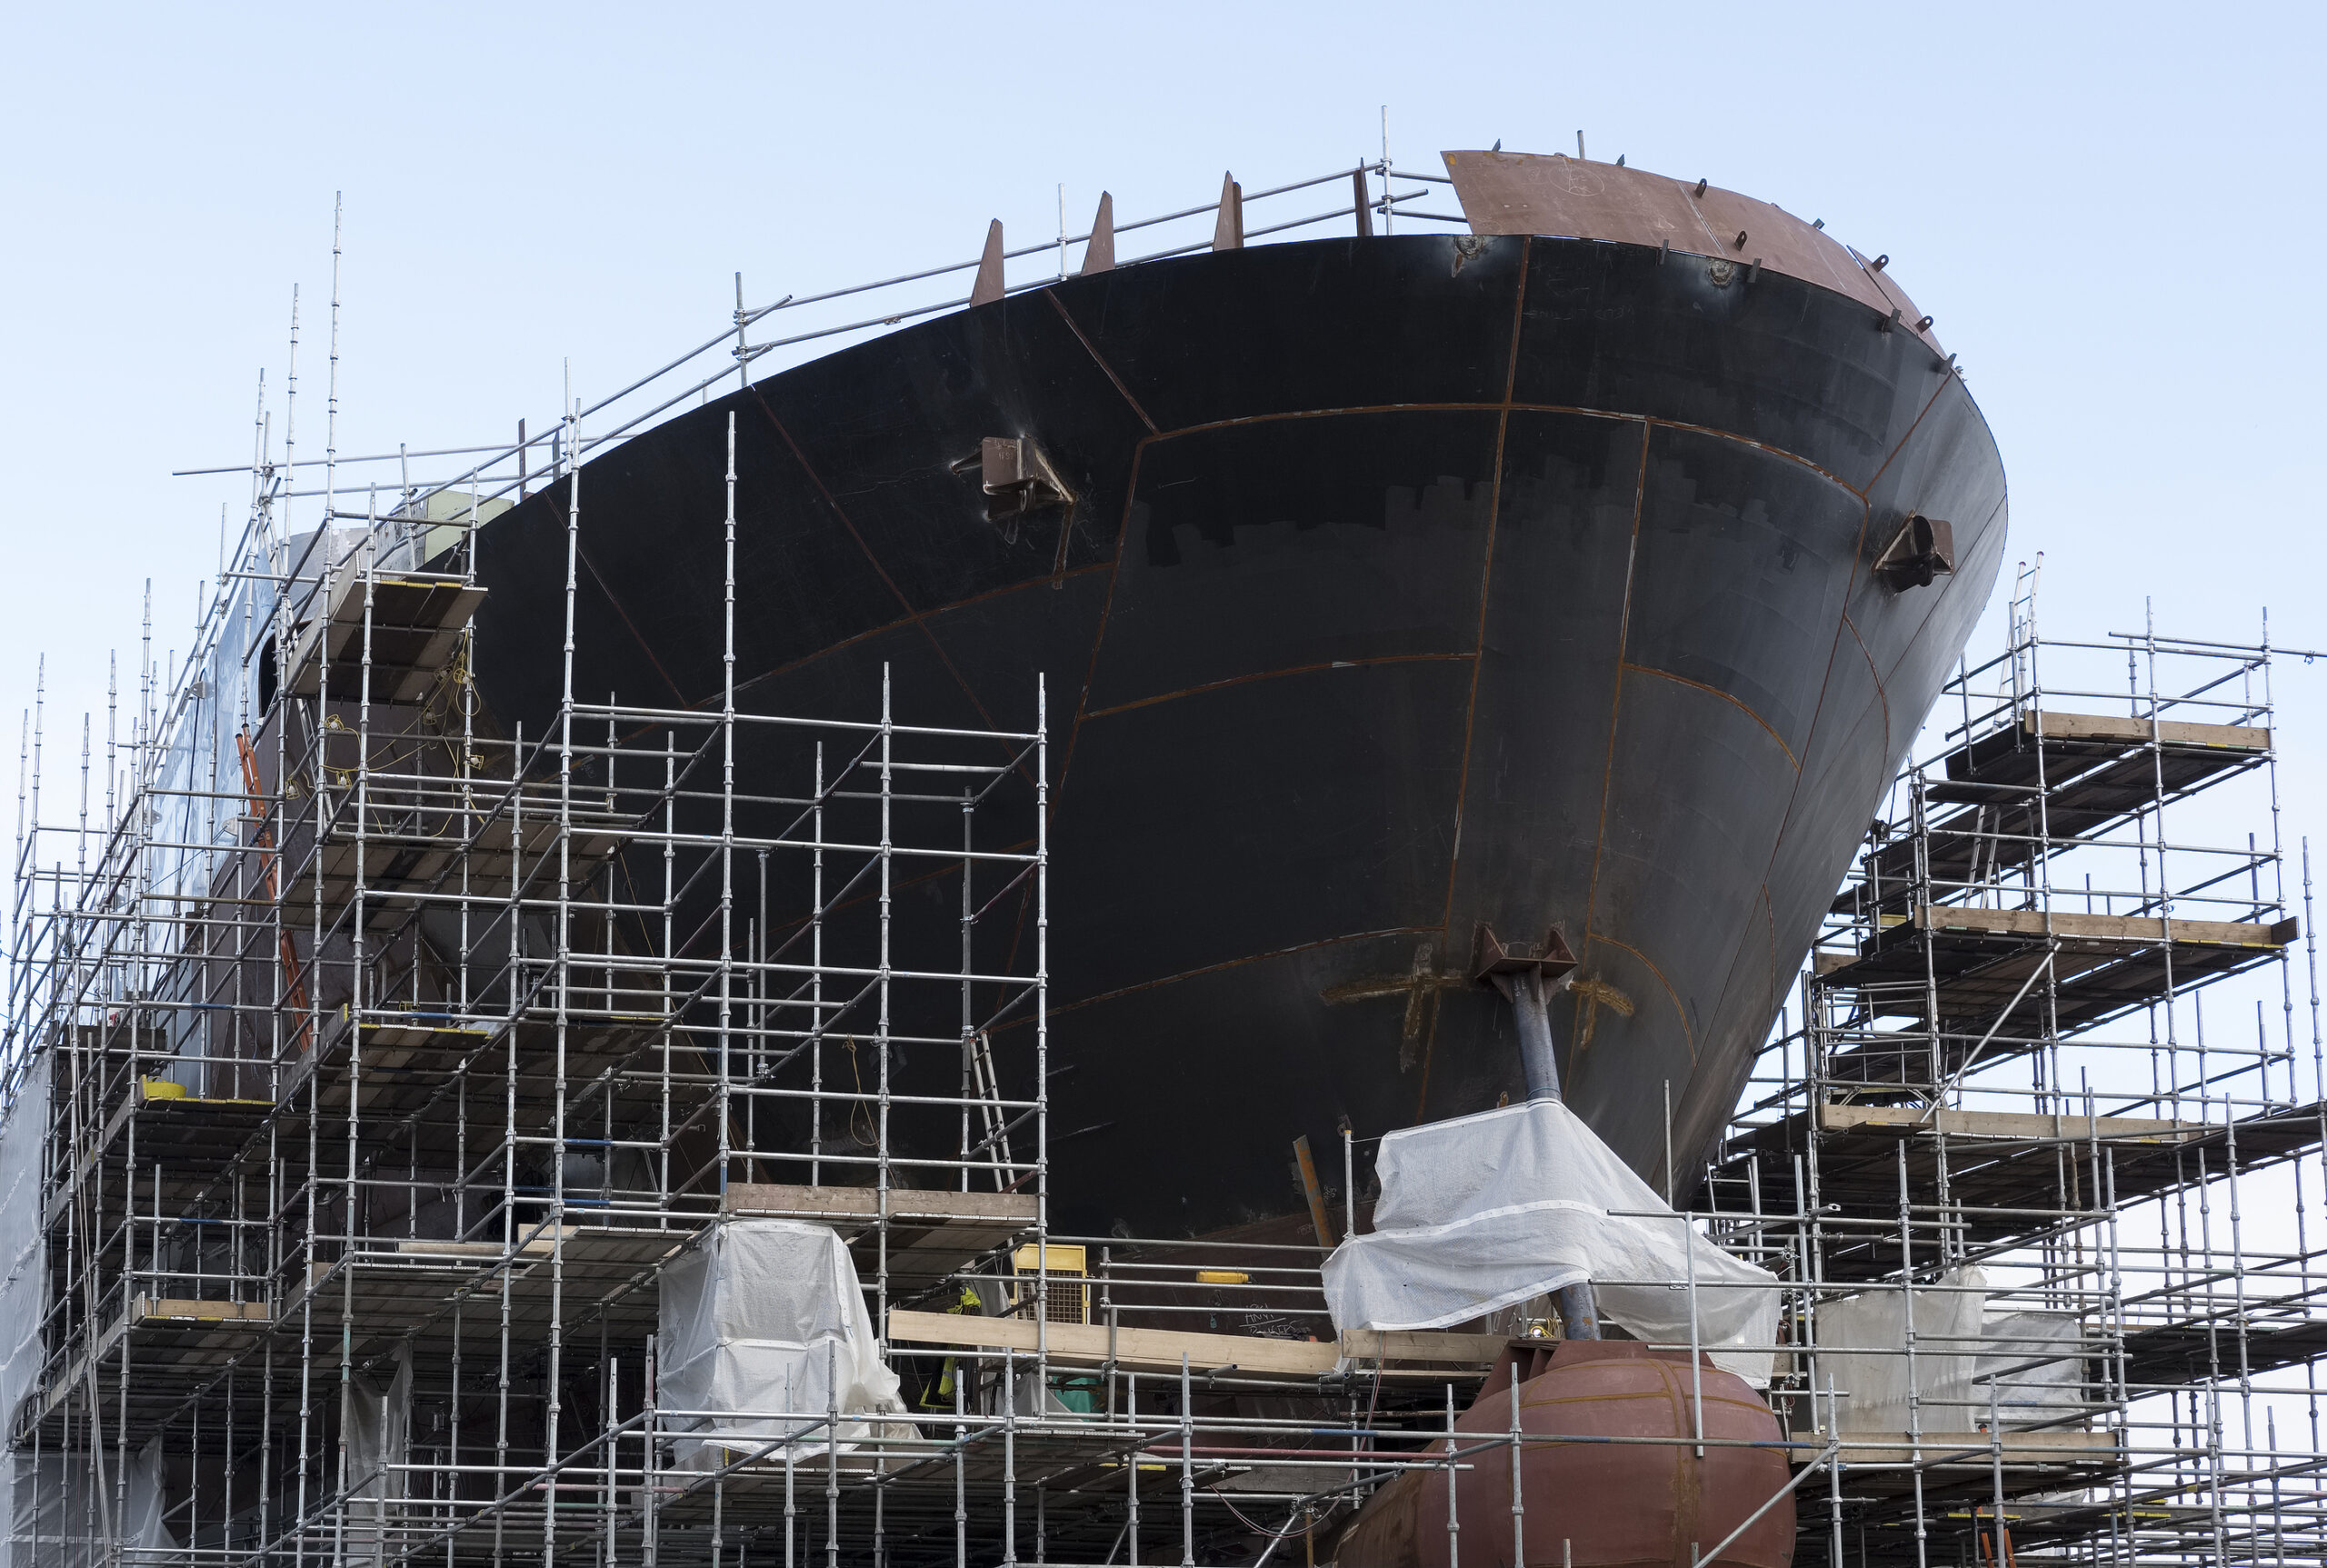 USL&H – Chemical Exposures for Shipbuilders